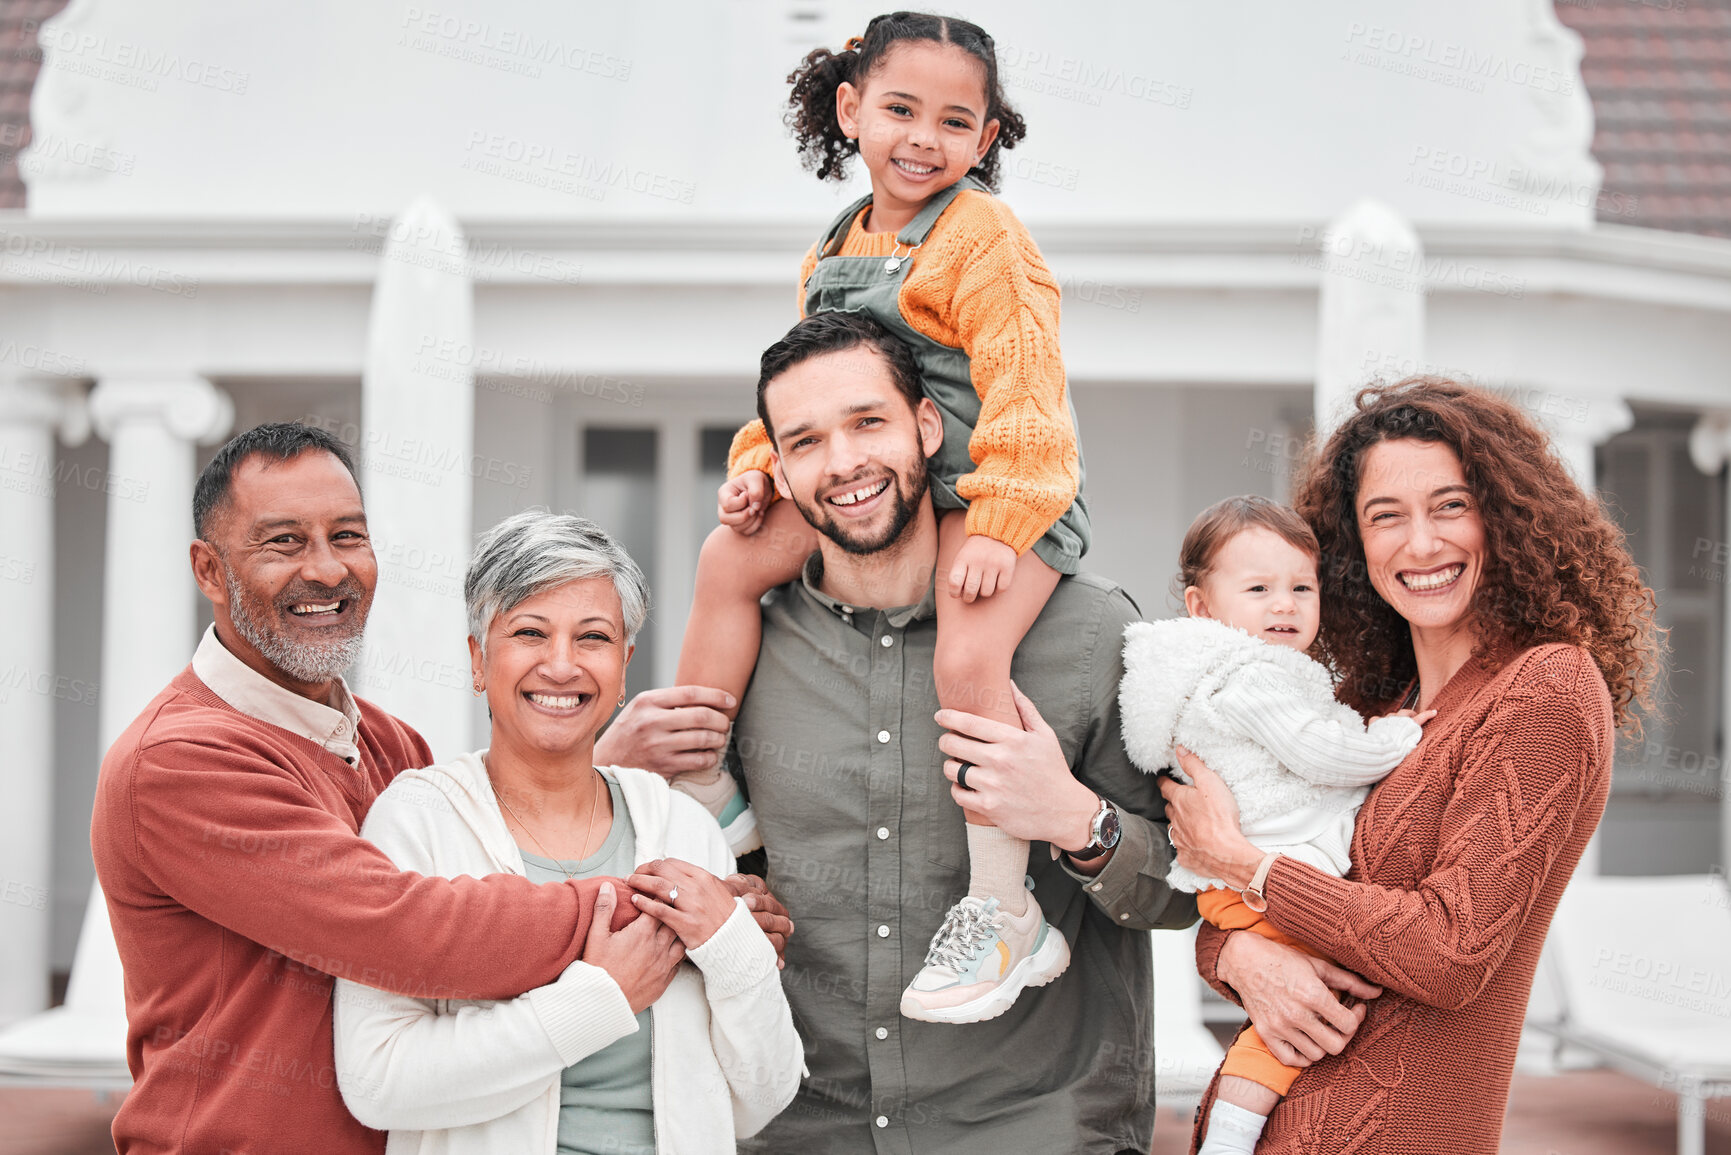 Buy stock photo Portrait, big family with smile and piggy back at new home, grandparents and parents with kids in happiness and security. Happy men, women and children in backyard together with love outside house.